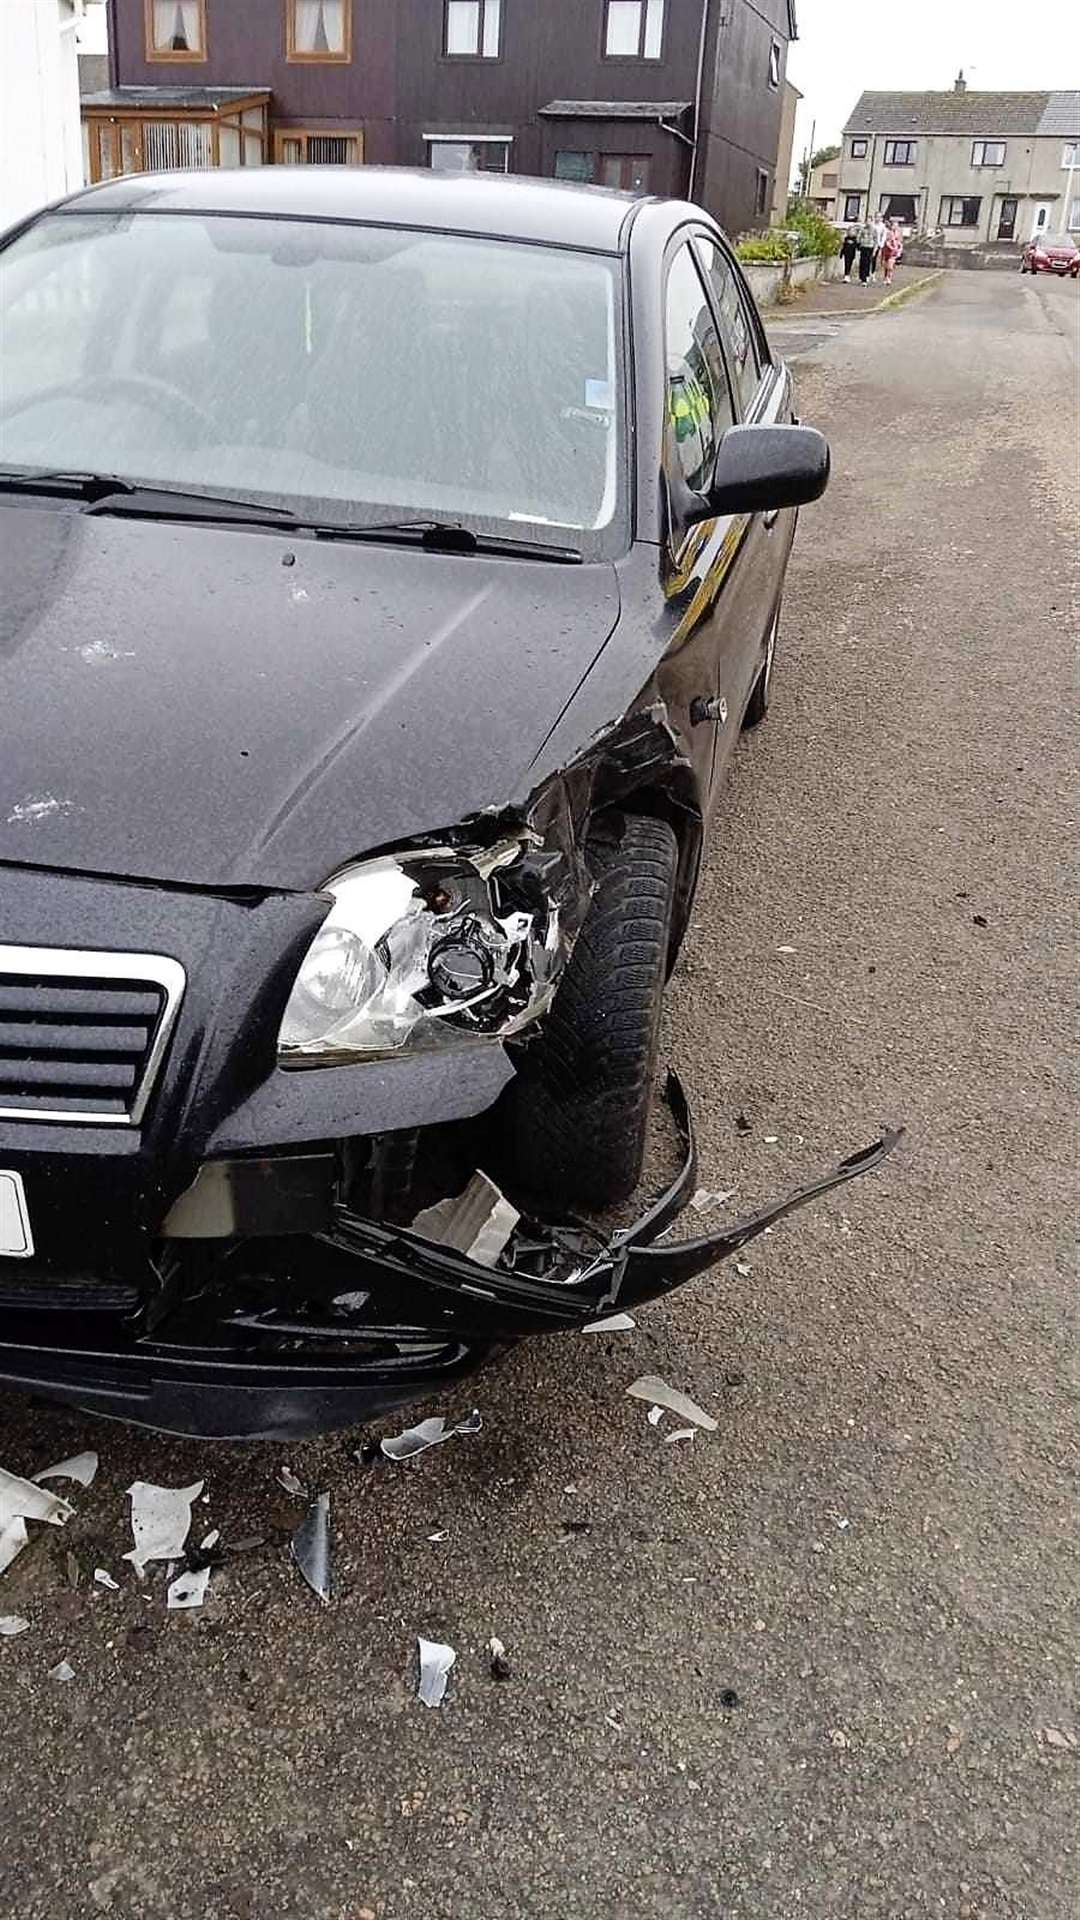 The parked car was written-off after the incident.